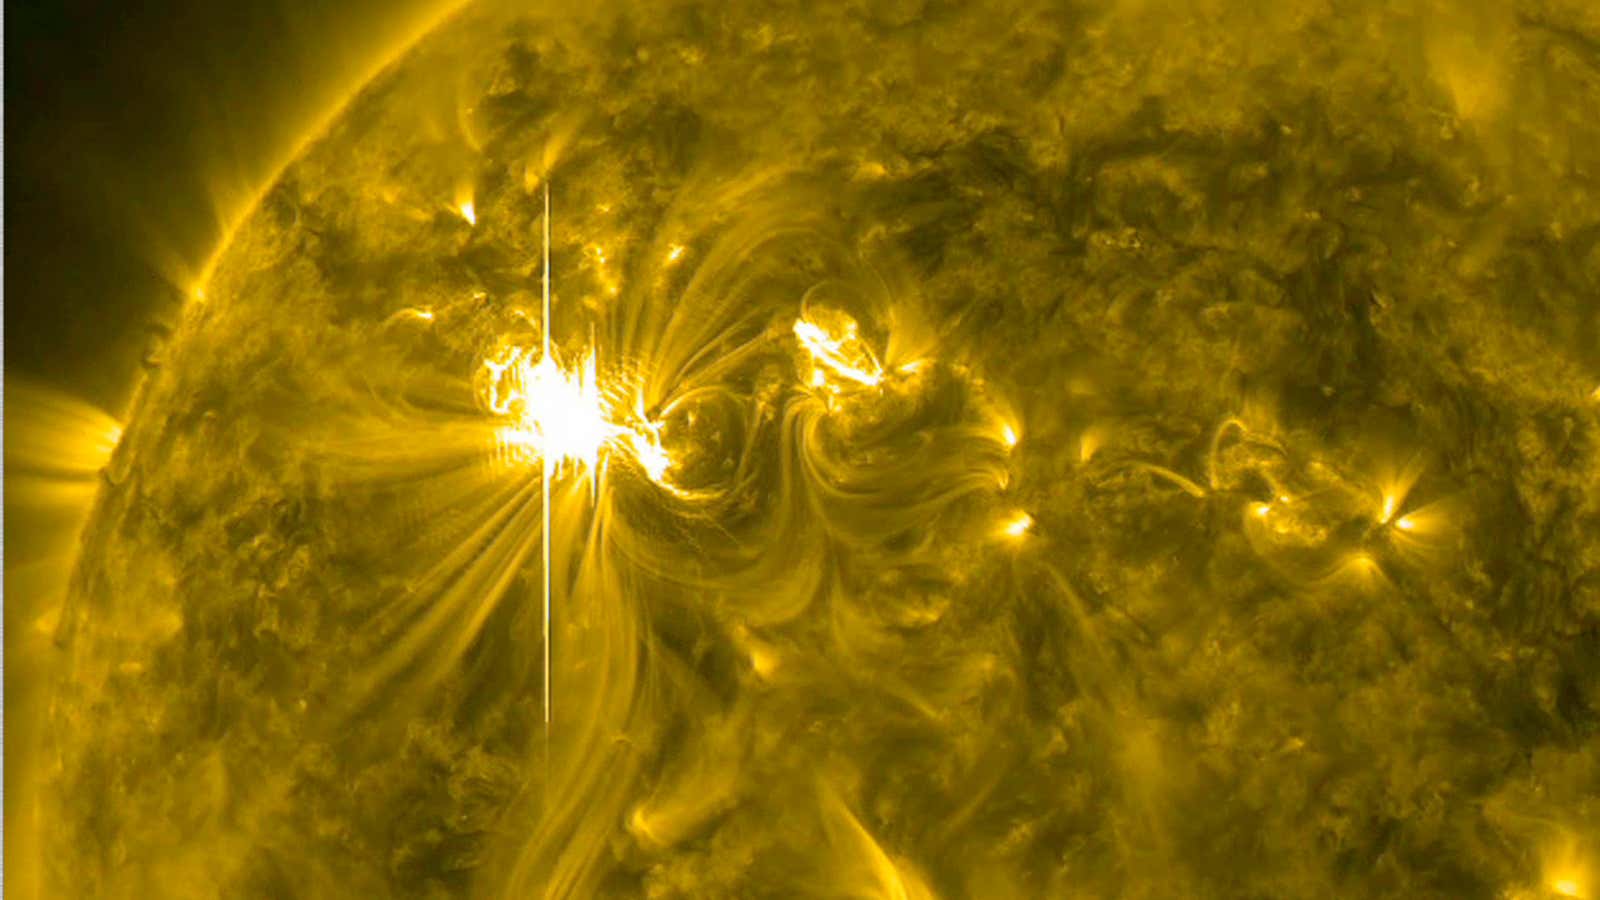 There’s a reason why the US government keeps such a close eye on the sun.